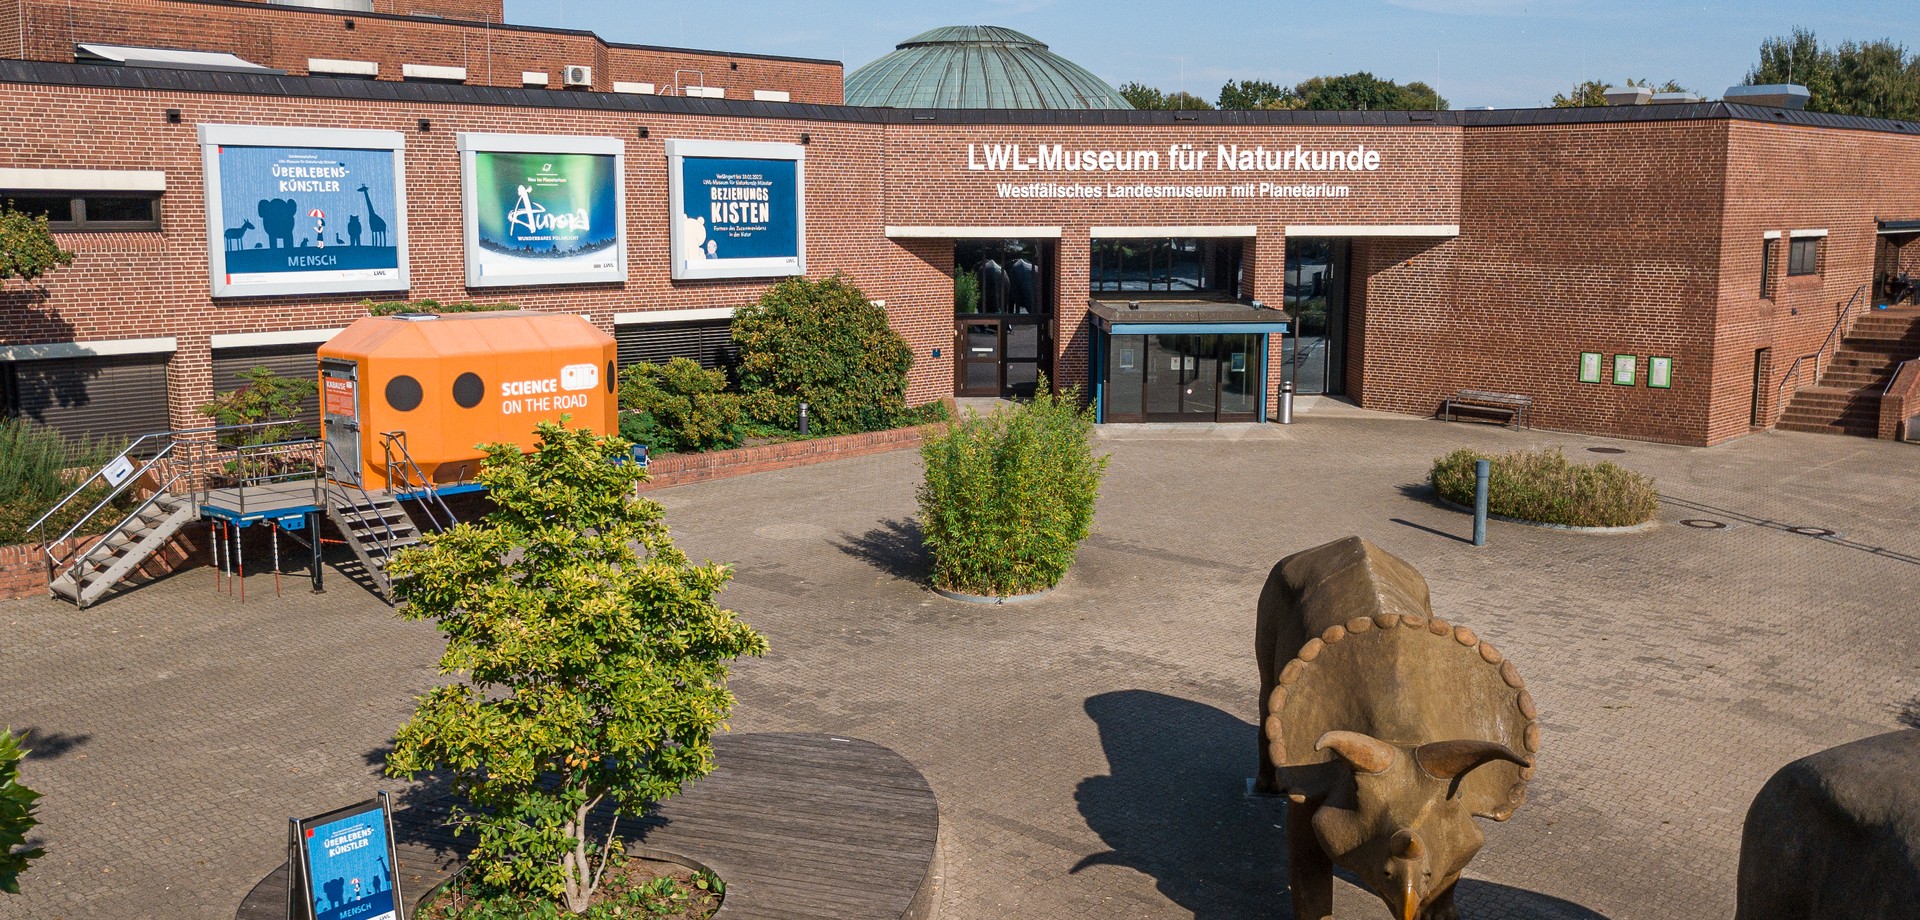 Museum with surrounding green spaces and the objects on the forecourt.